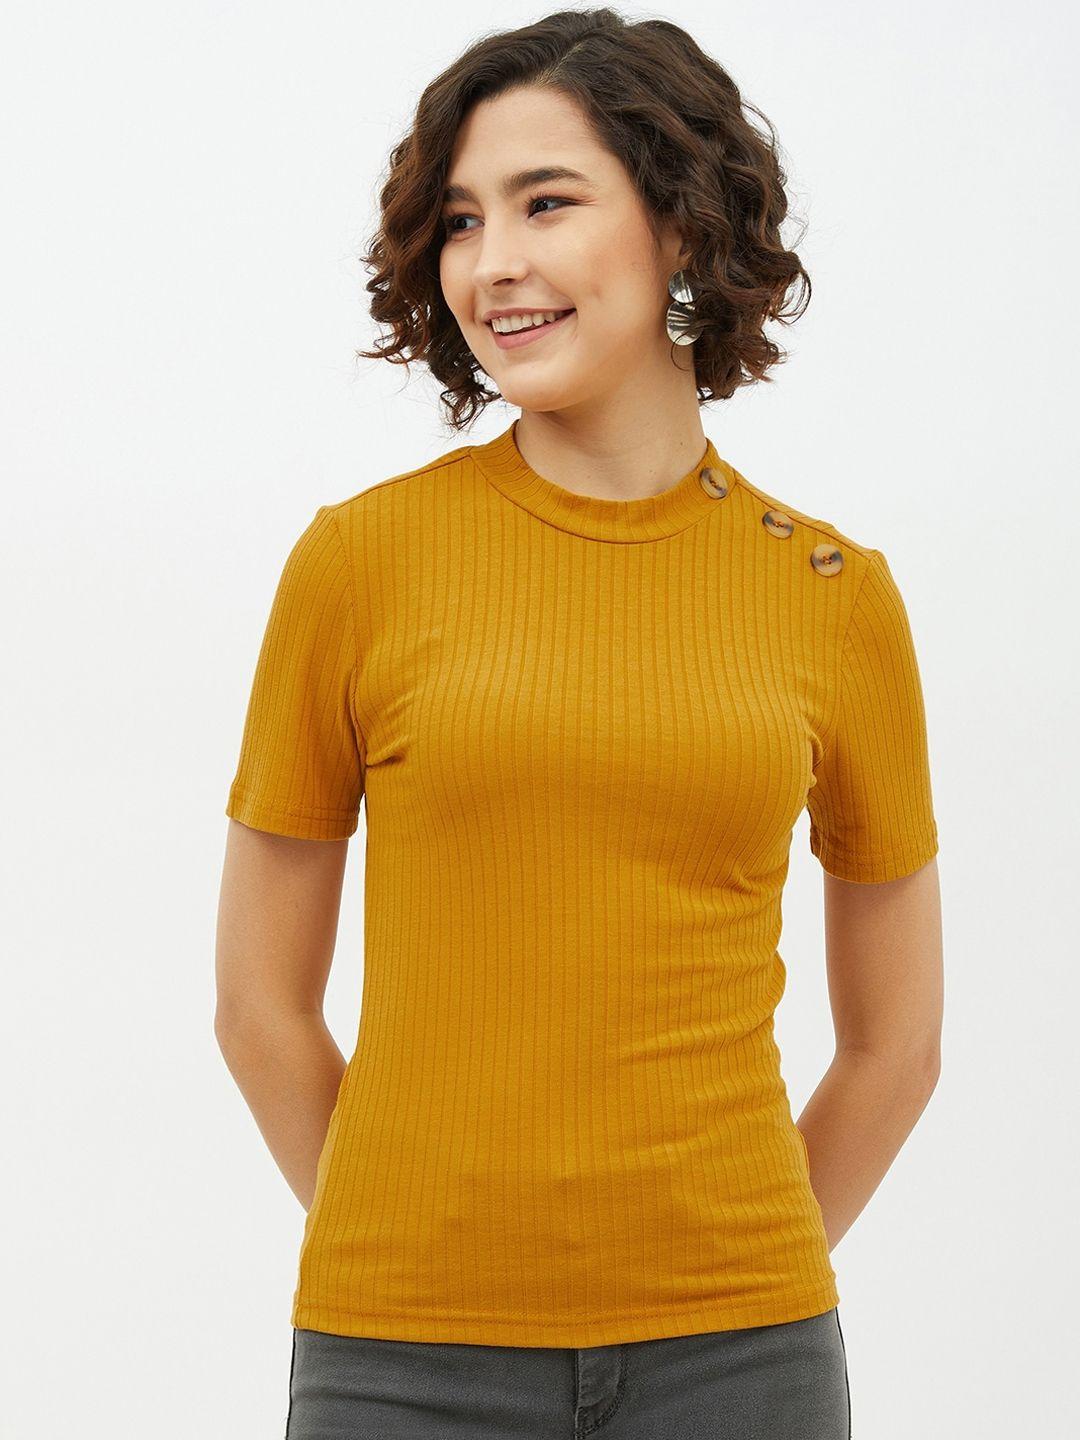 harpa-mustard-yellow-knitted-fitted-top